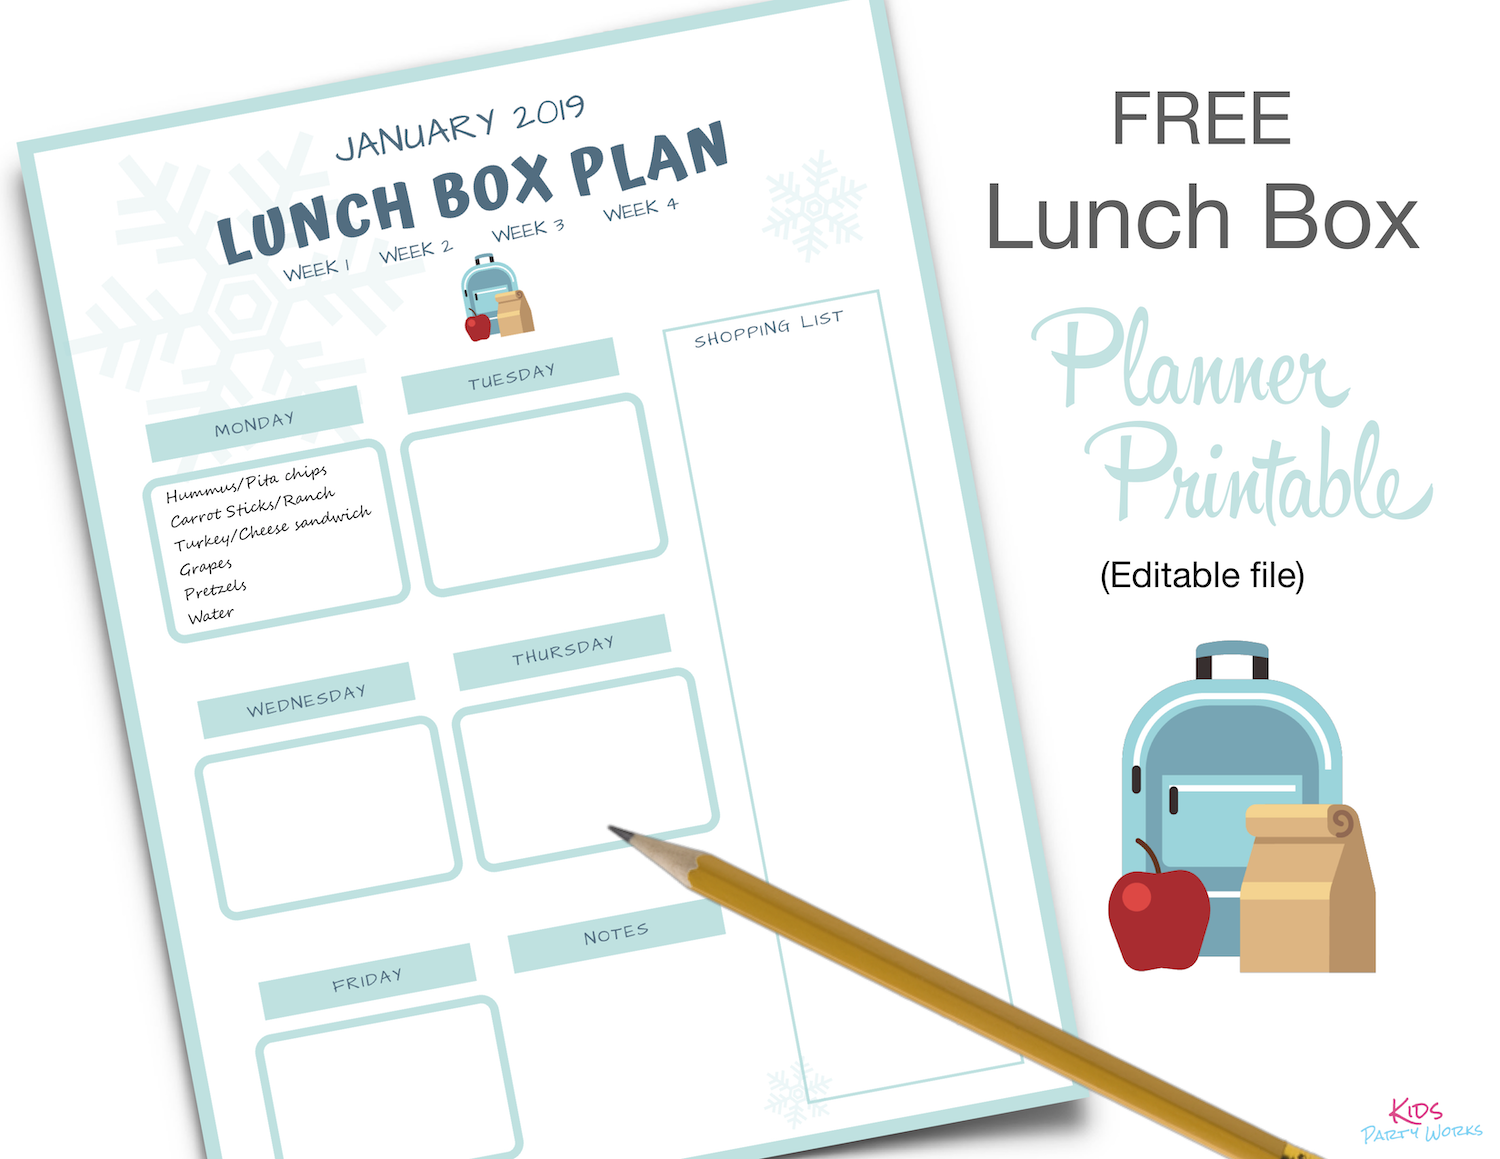 Free Lunch Box Planner. KidsPartyWorks.Com